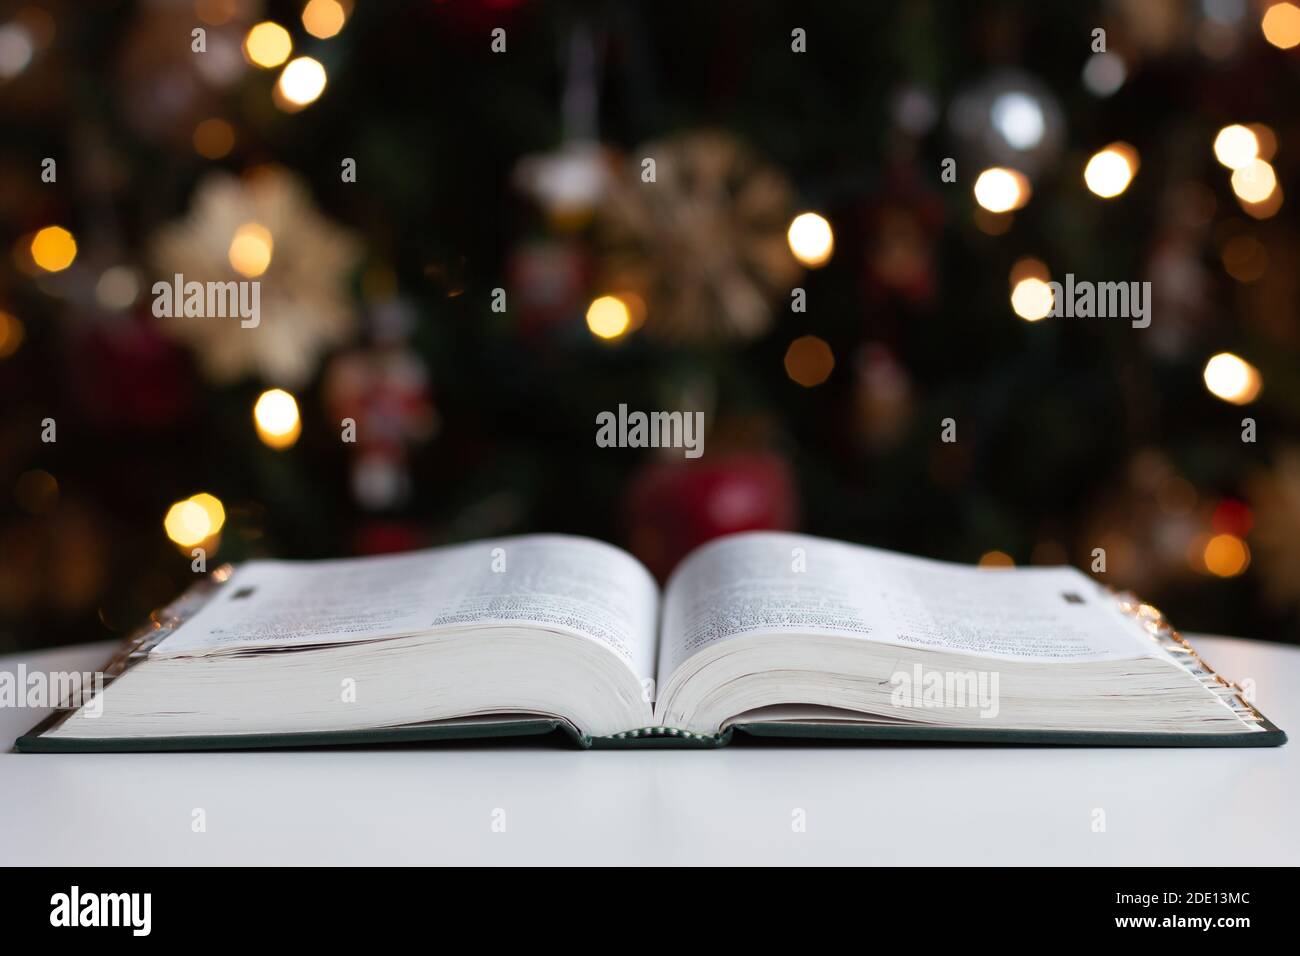 Bible on white table open in front of Christmas tree with lights, seasonal holiday background Stock Photo